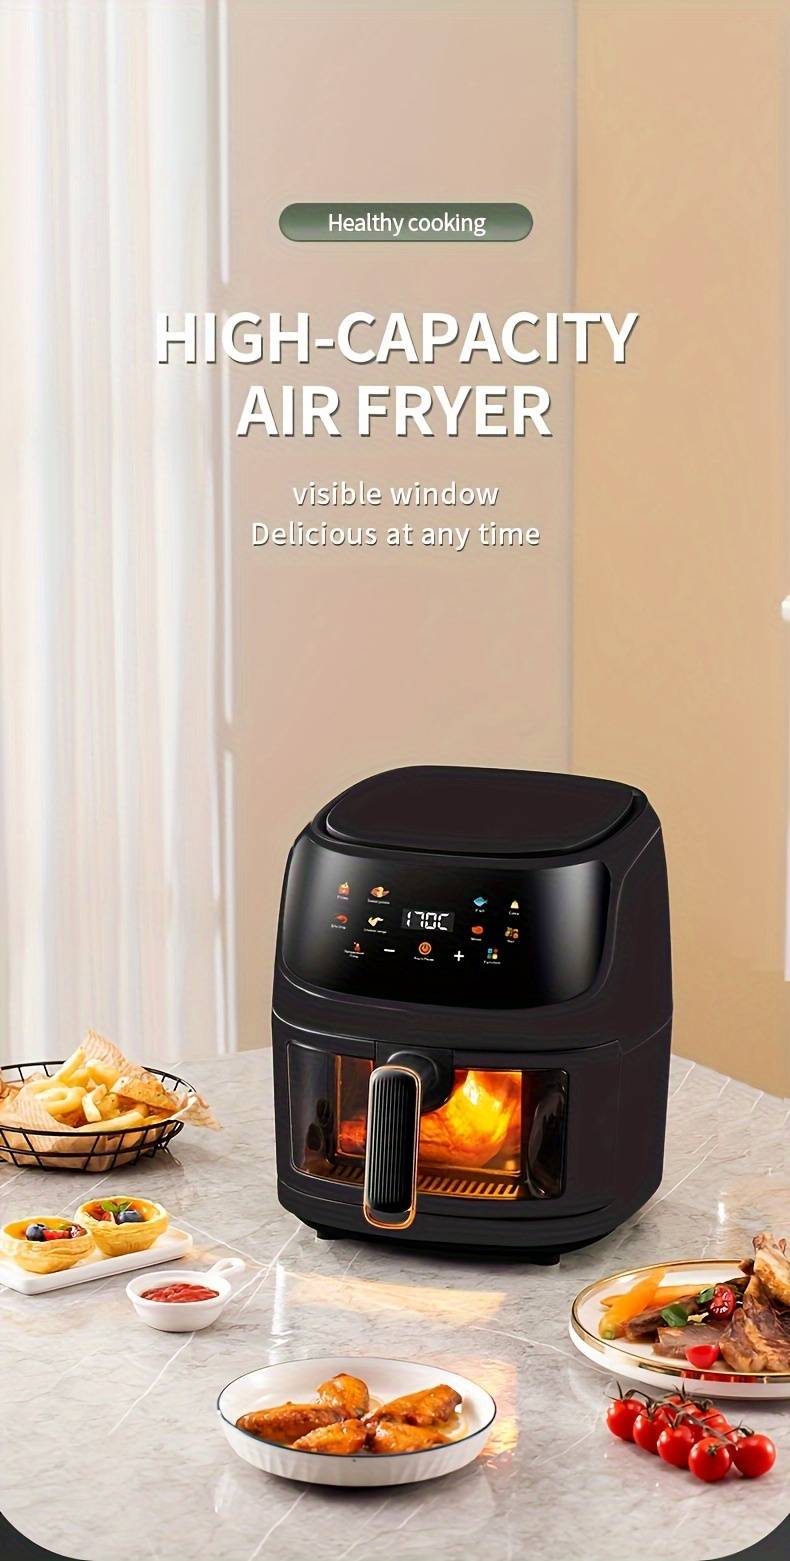 Air Fryer 6-in-1 Digital Kitchen Oven 1400W Oil Free, Healthy Frying  Cooker, transparent New Large Capacity Touch Screen Multifunction mini ove, Air  fryer Toaster Oven –